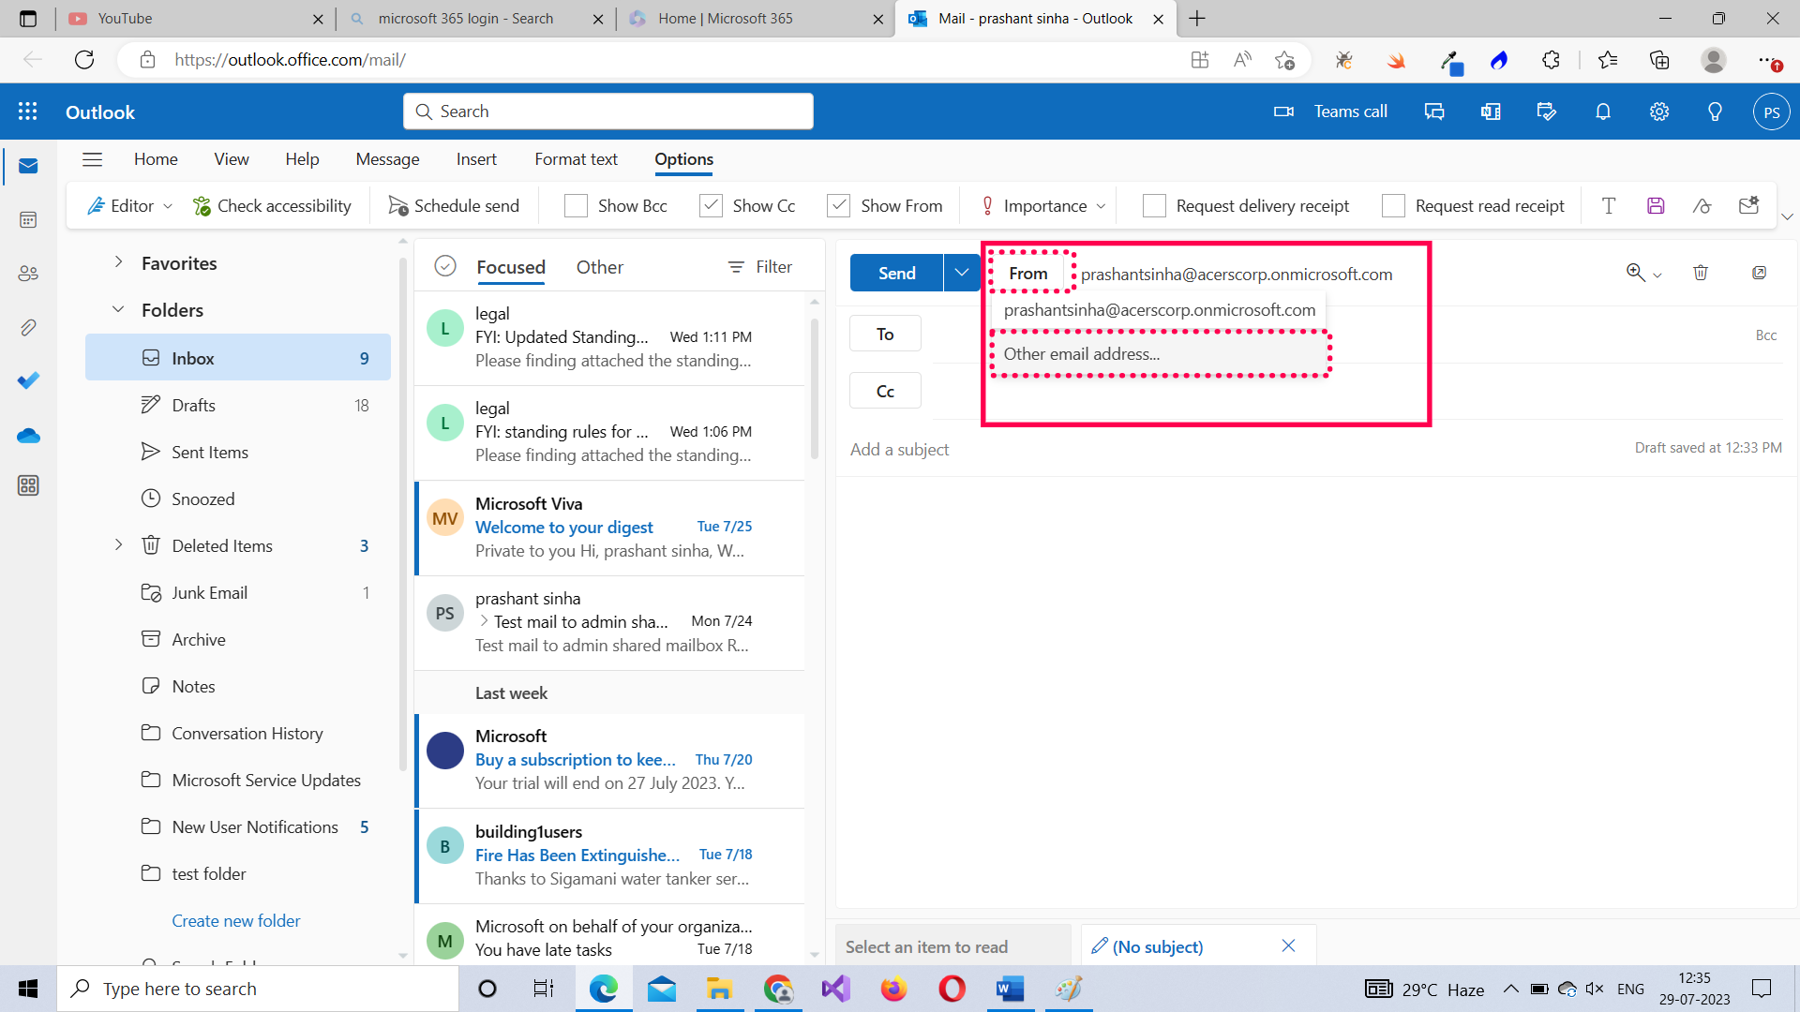 This screenshot shows how a Microsoft 365 user can add a shared mailbox address to the from email address field.